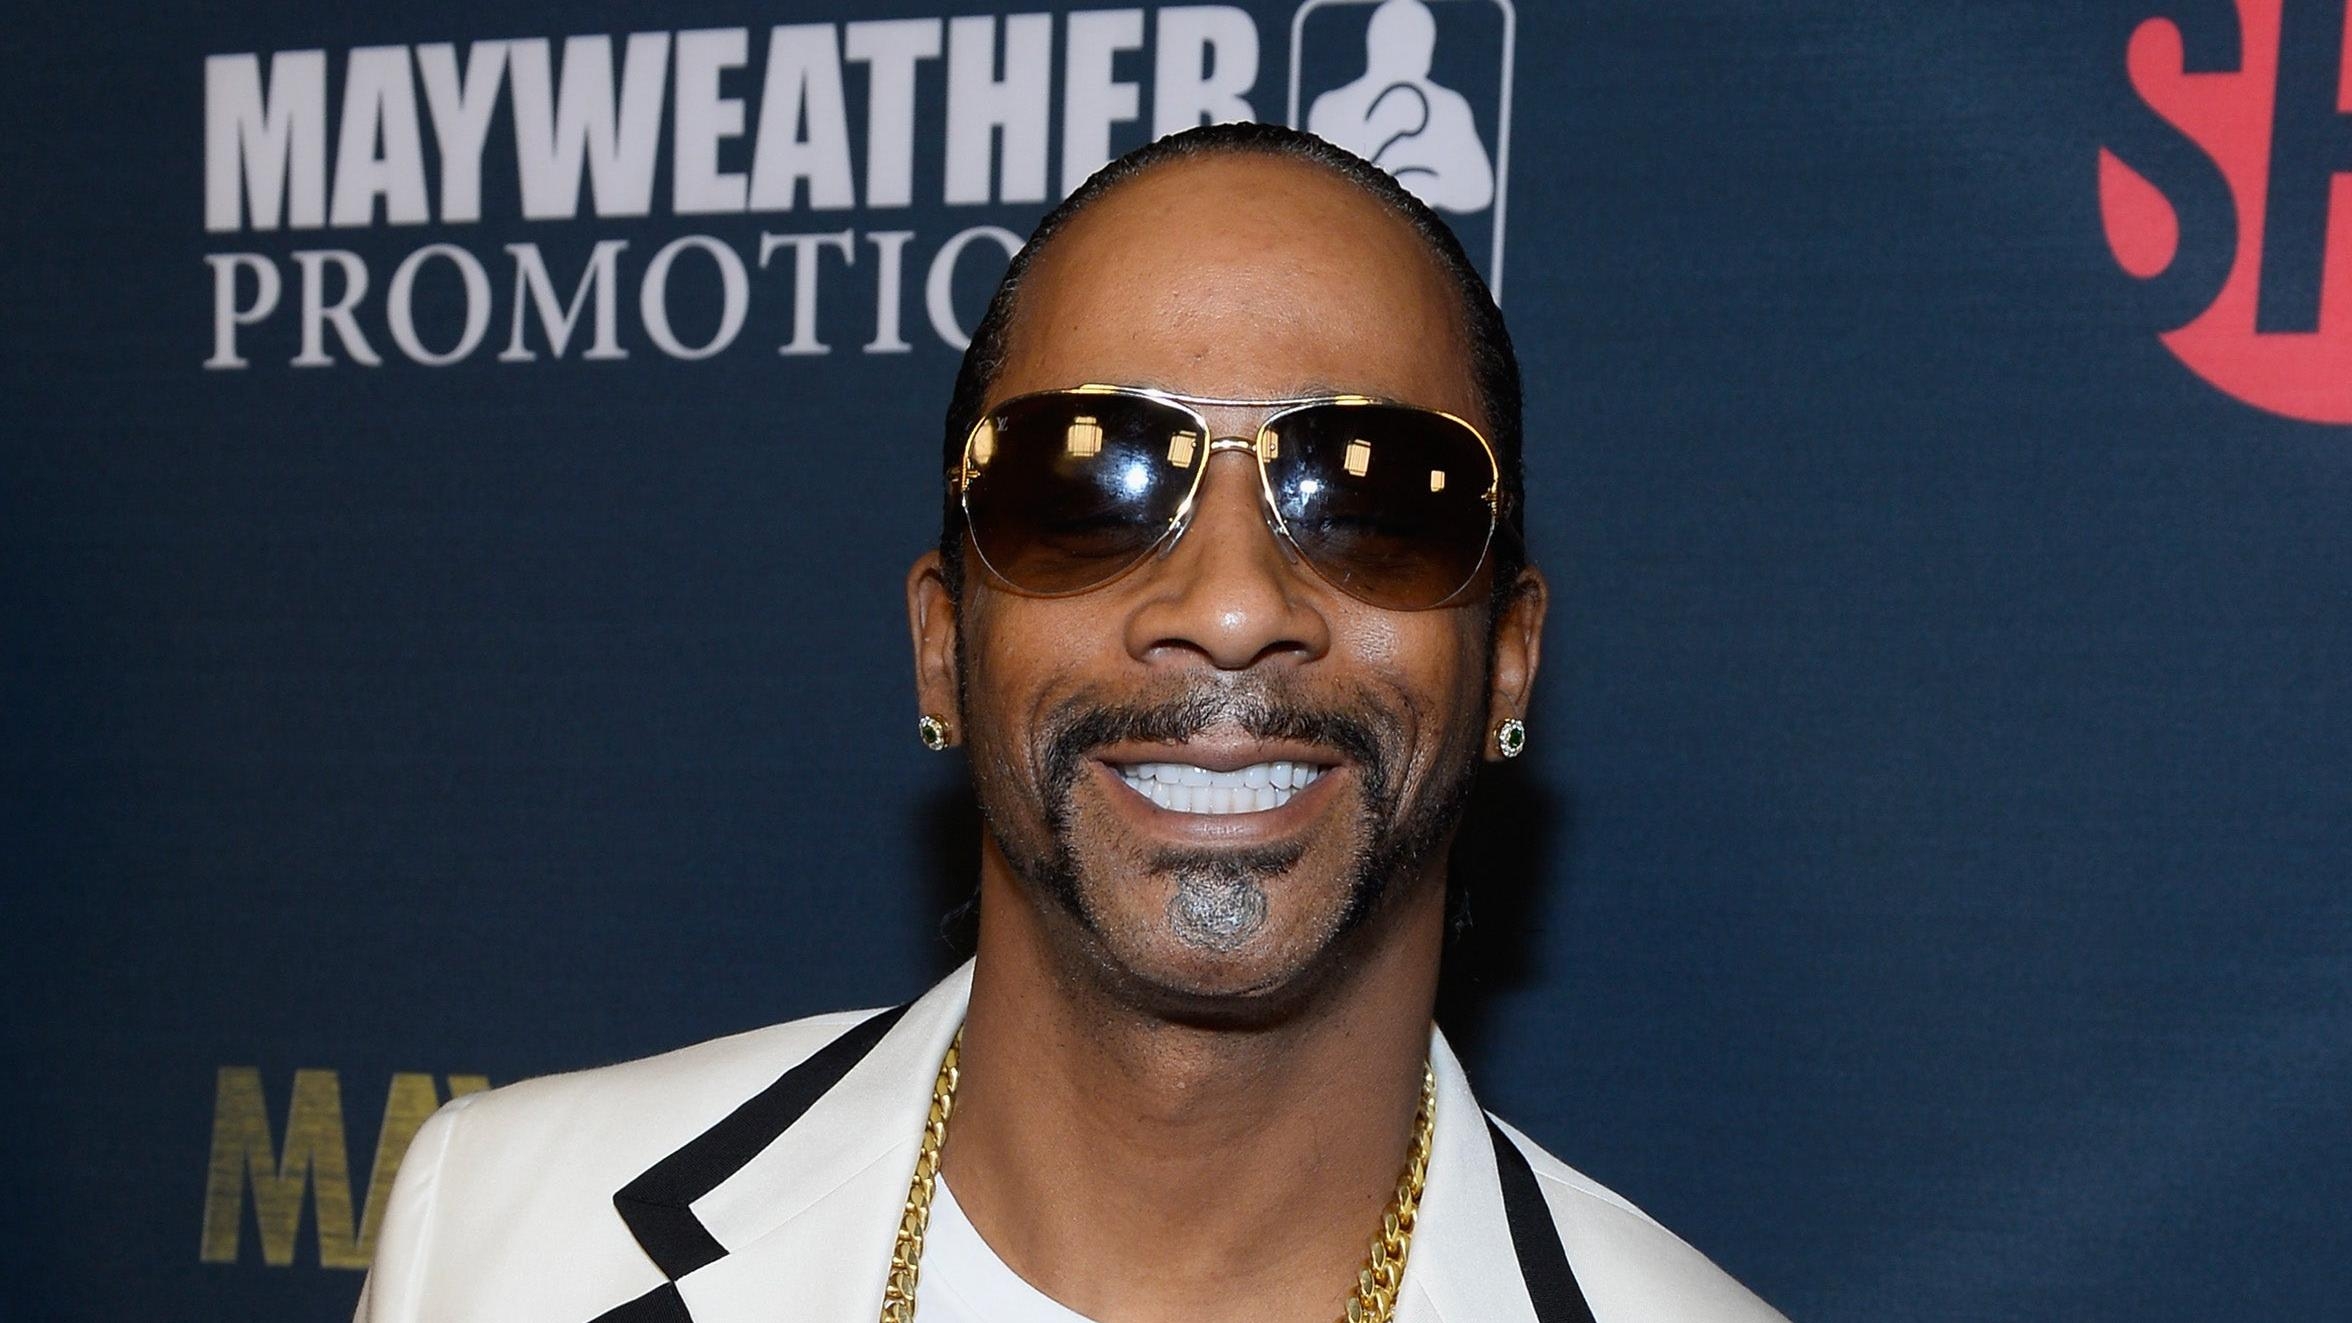 Katt Williams thoughtfully disassembles "cancel culture" in about 2 minutes